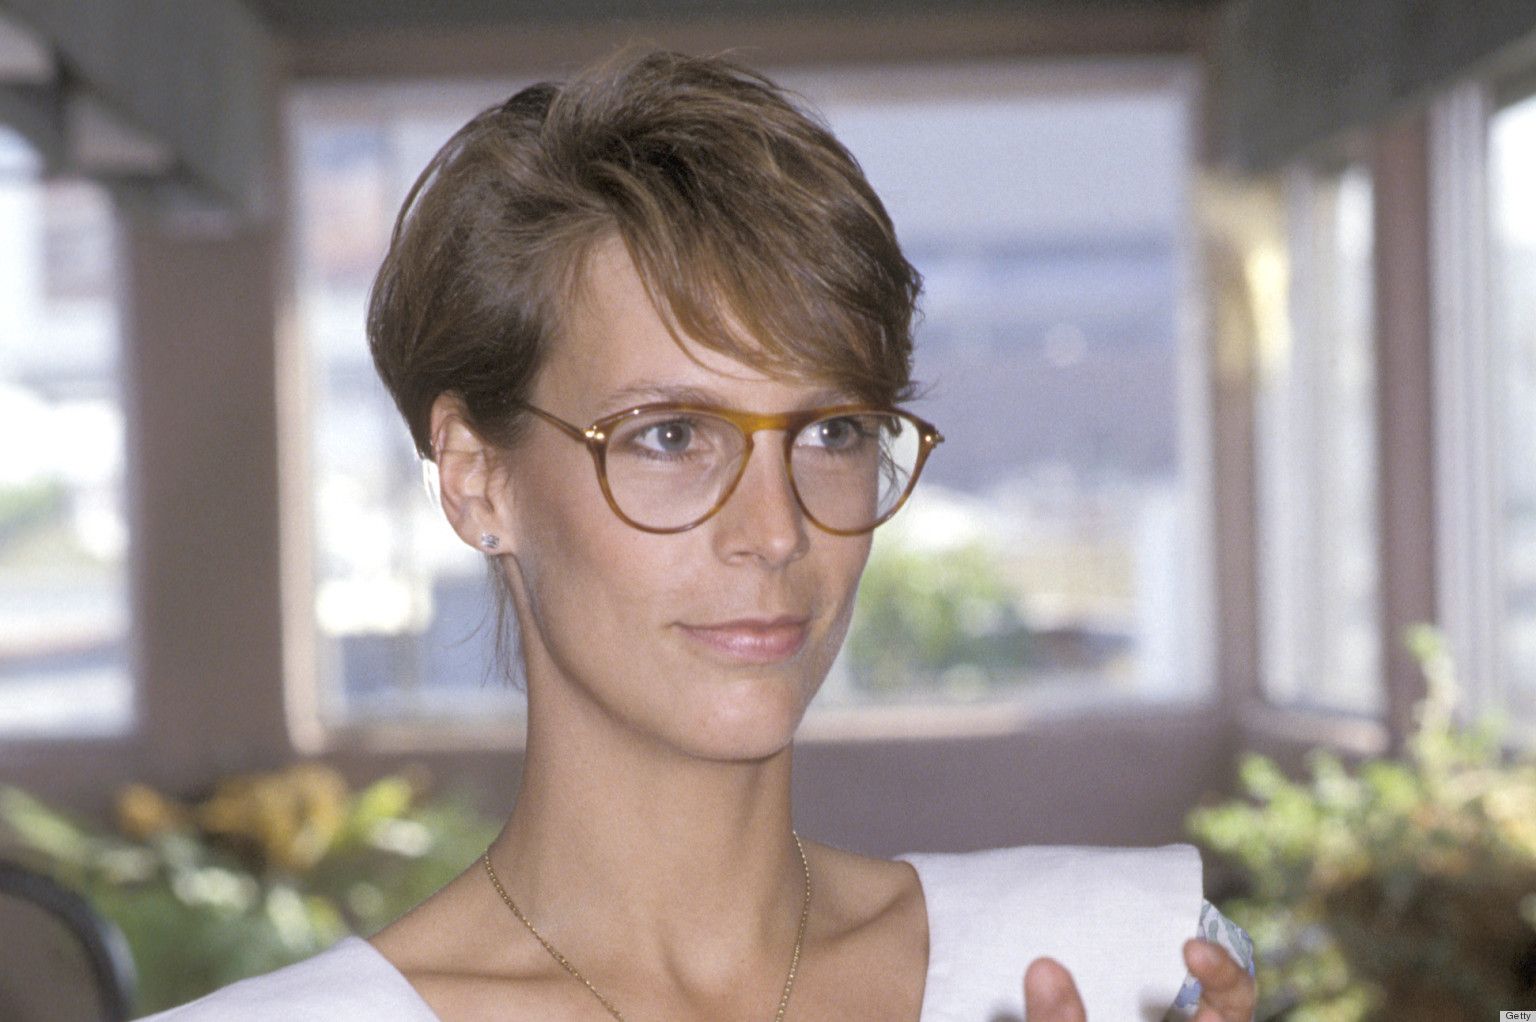 angel dearing recommends Jamie Lee Curtis Glasses